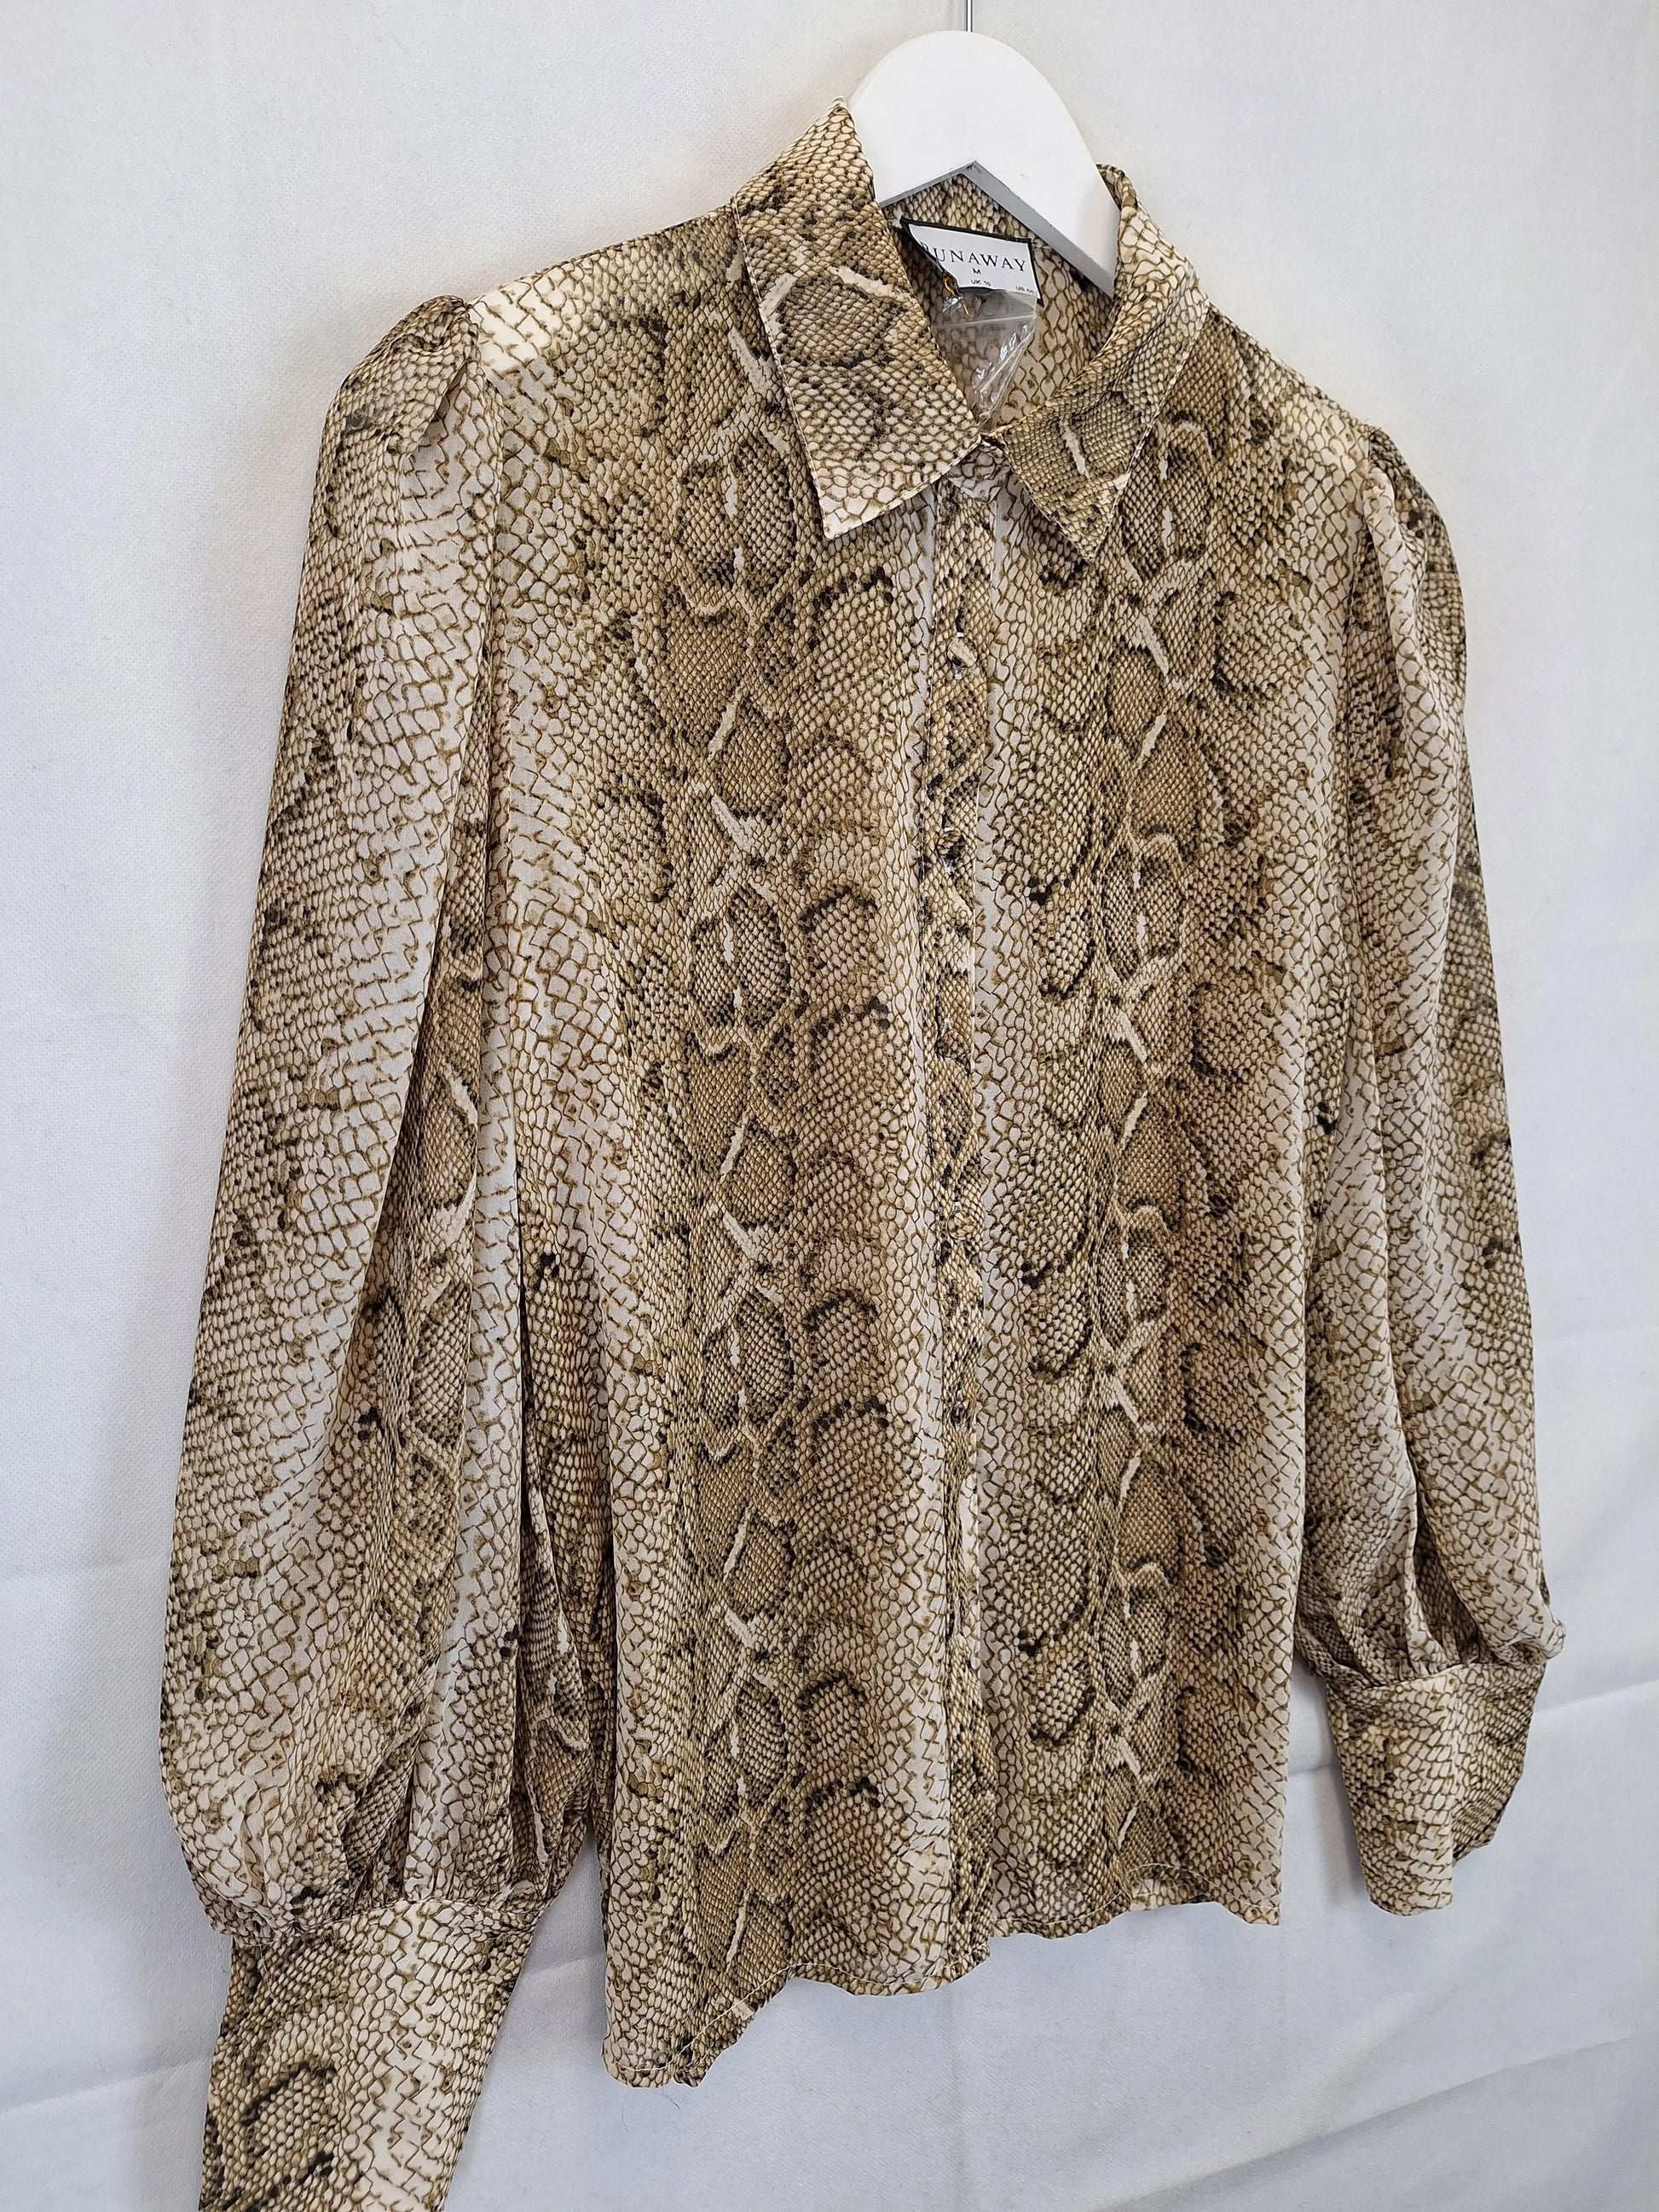 Runaway Snakeskin Patterned Full Sleeve Blouse Size M by SwapUp-Online Second Hand Store-Online Thrift Store